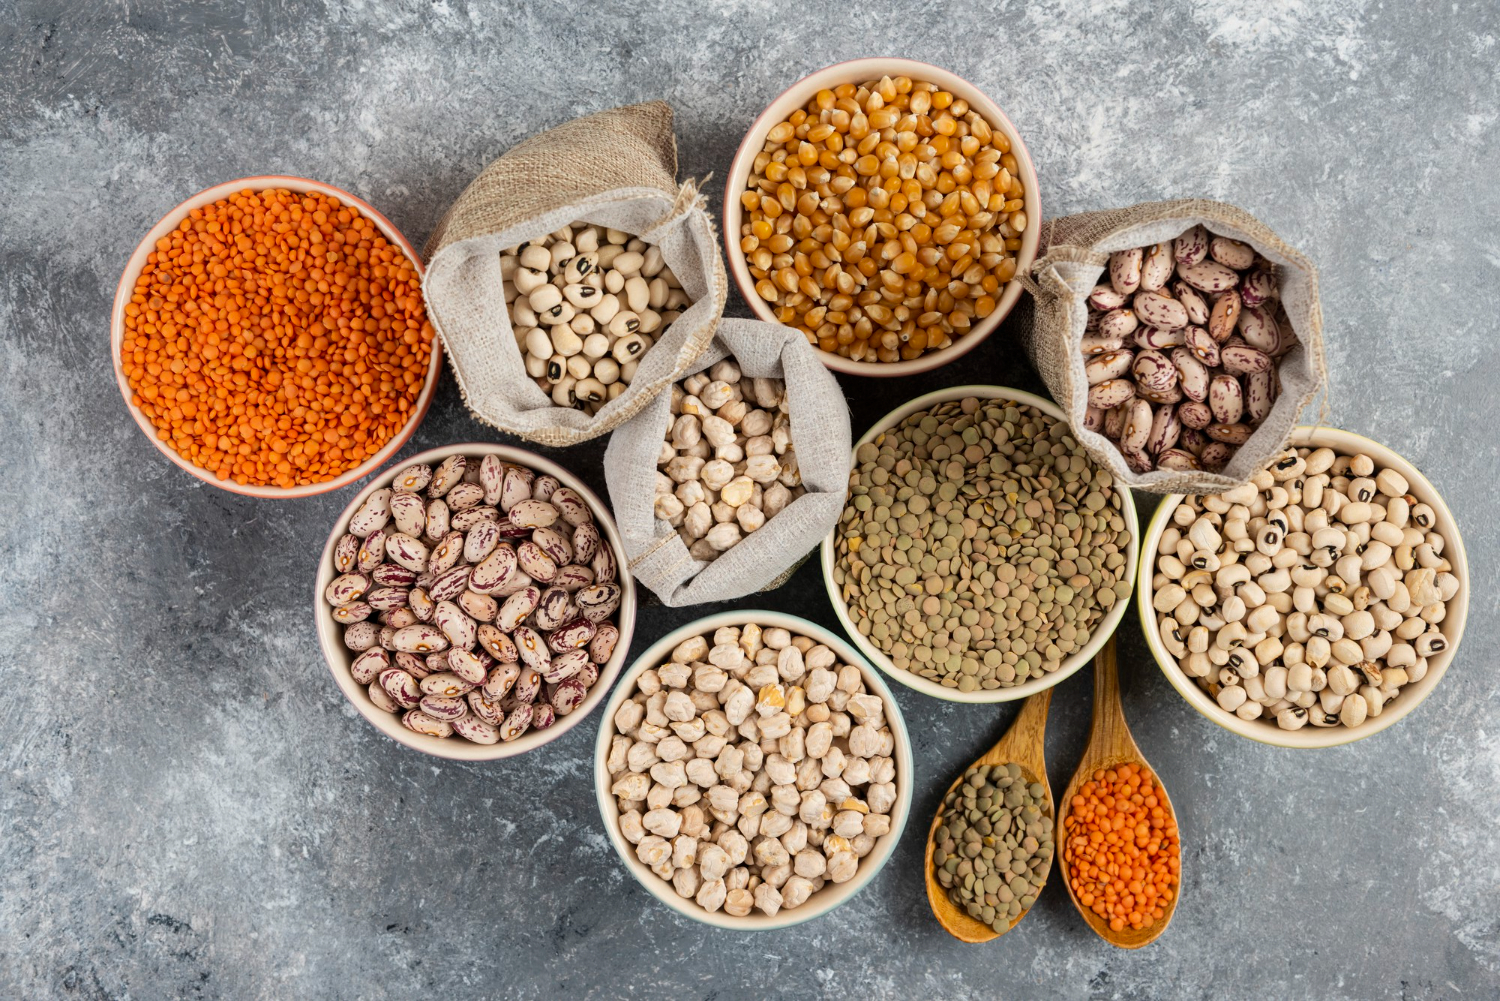 Legumes products